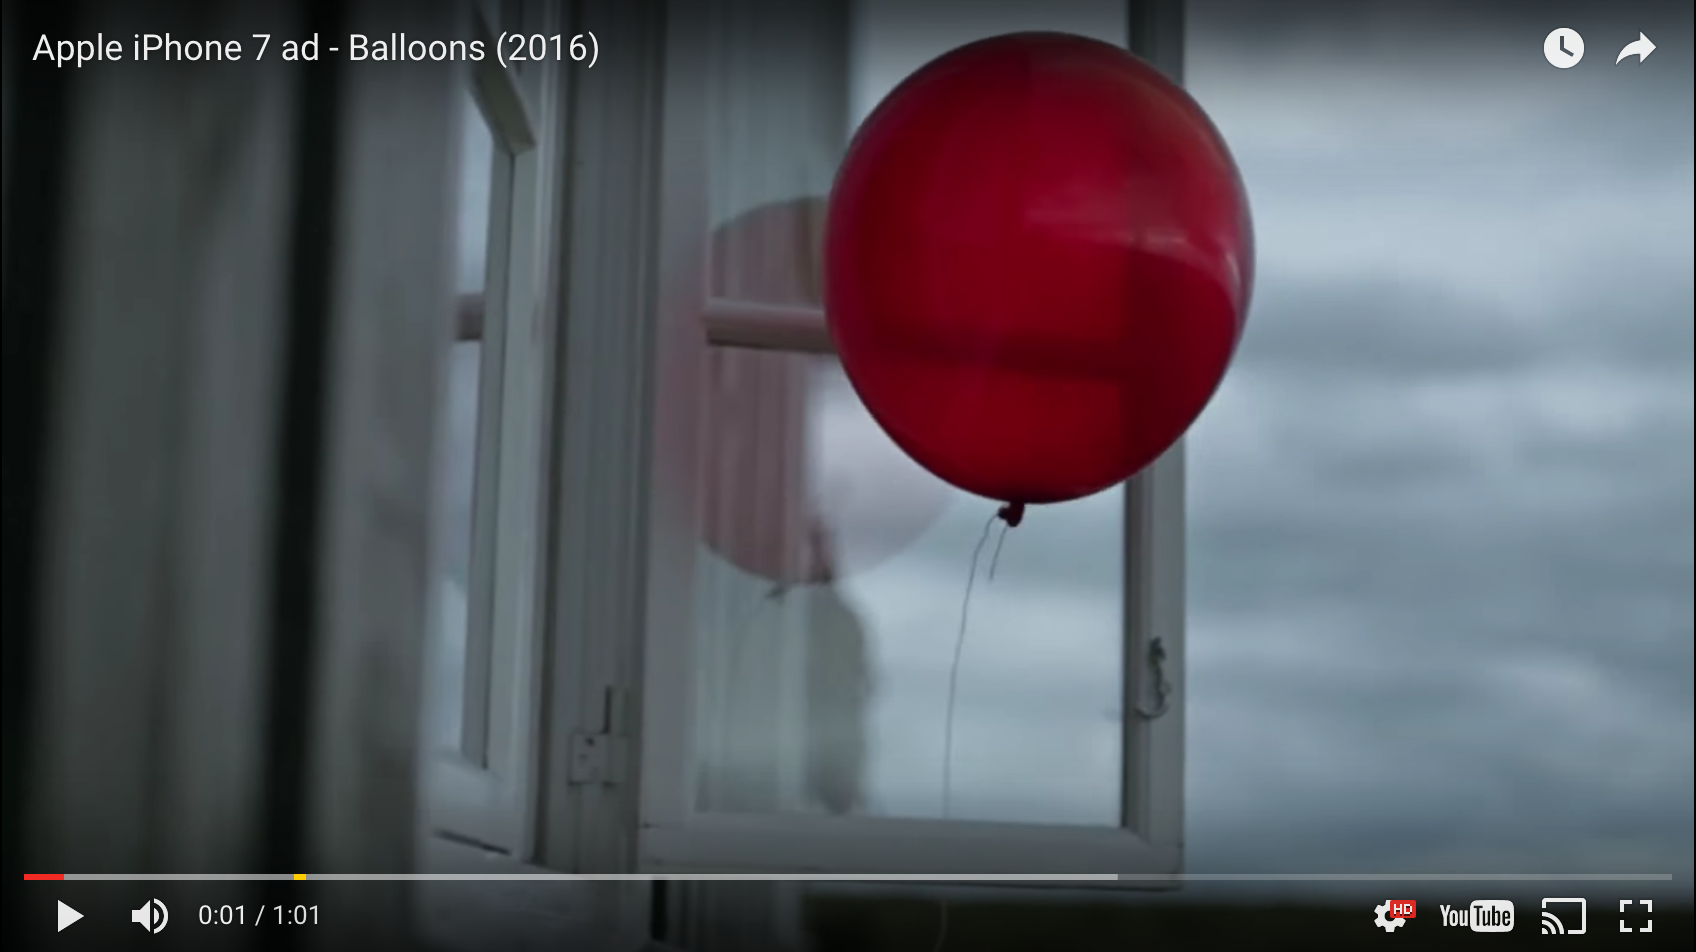 Apple summons 1956 classic “The Red Balloon” in new ad